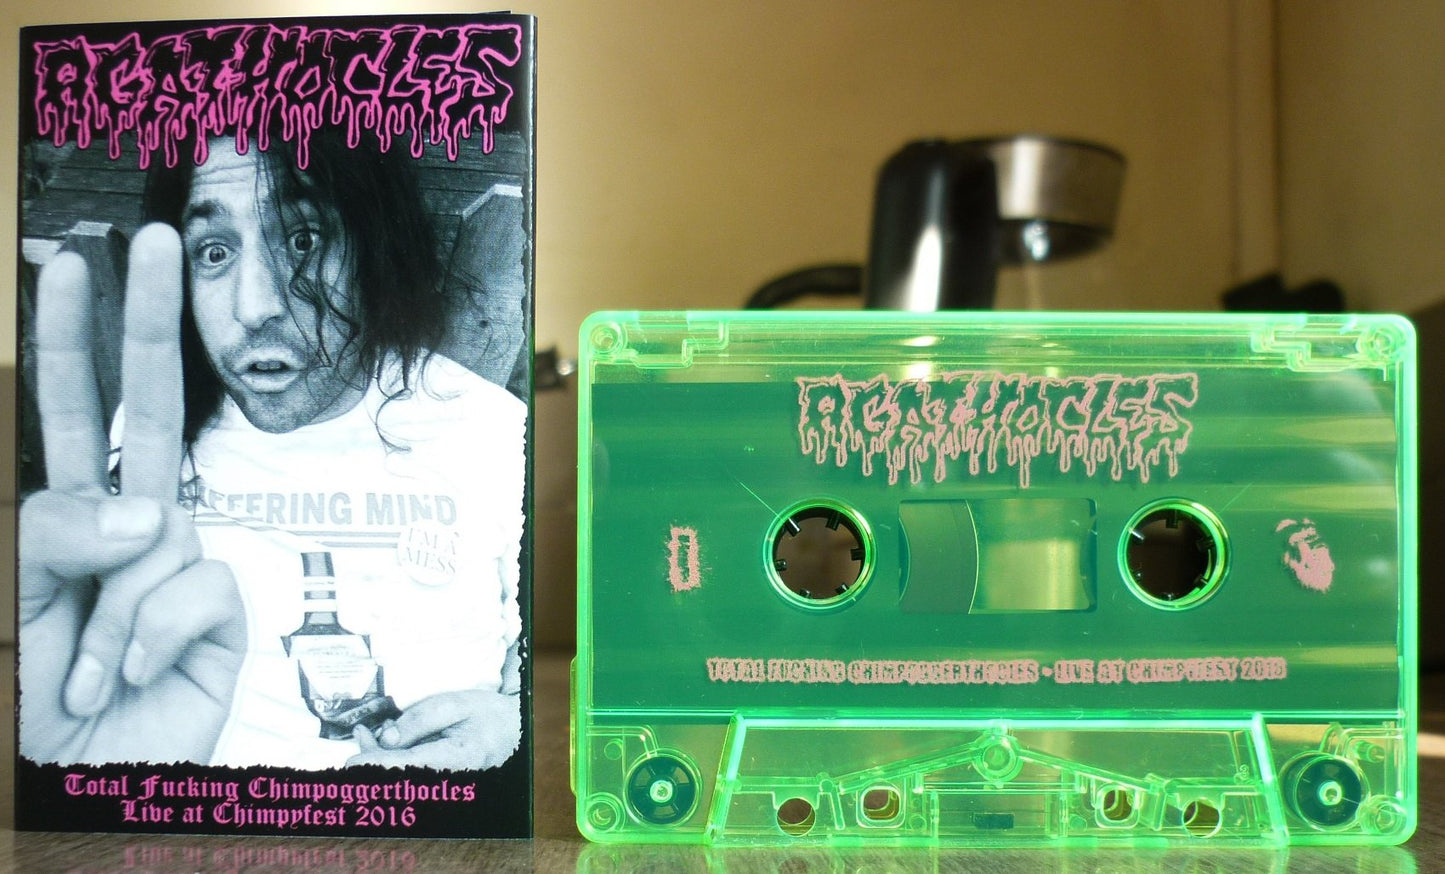 AGATHOCLES "Total Fucking Chimpoggerthocles • Live At Chimpyfest 2016" Tape